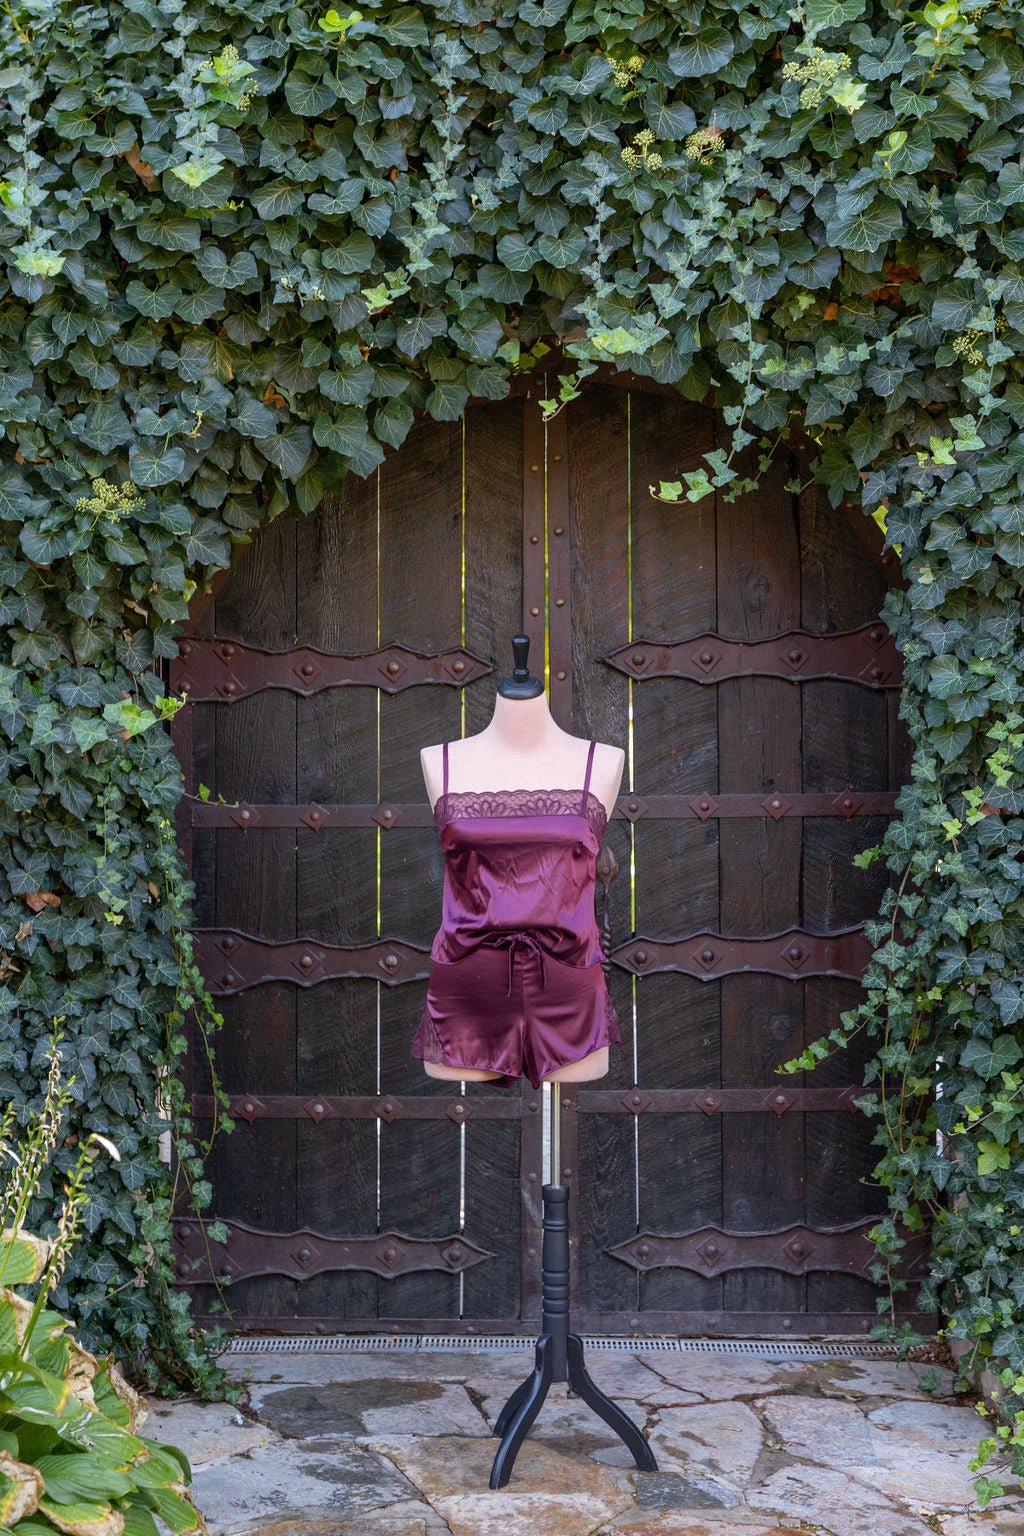 Square Neck Satin & Lace Cami - Wine - Mentionables